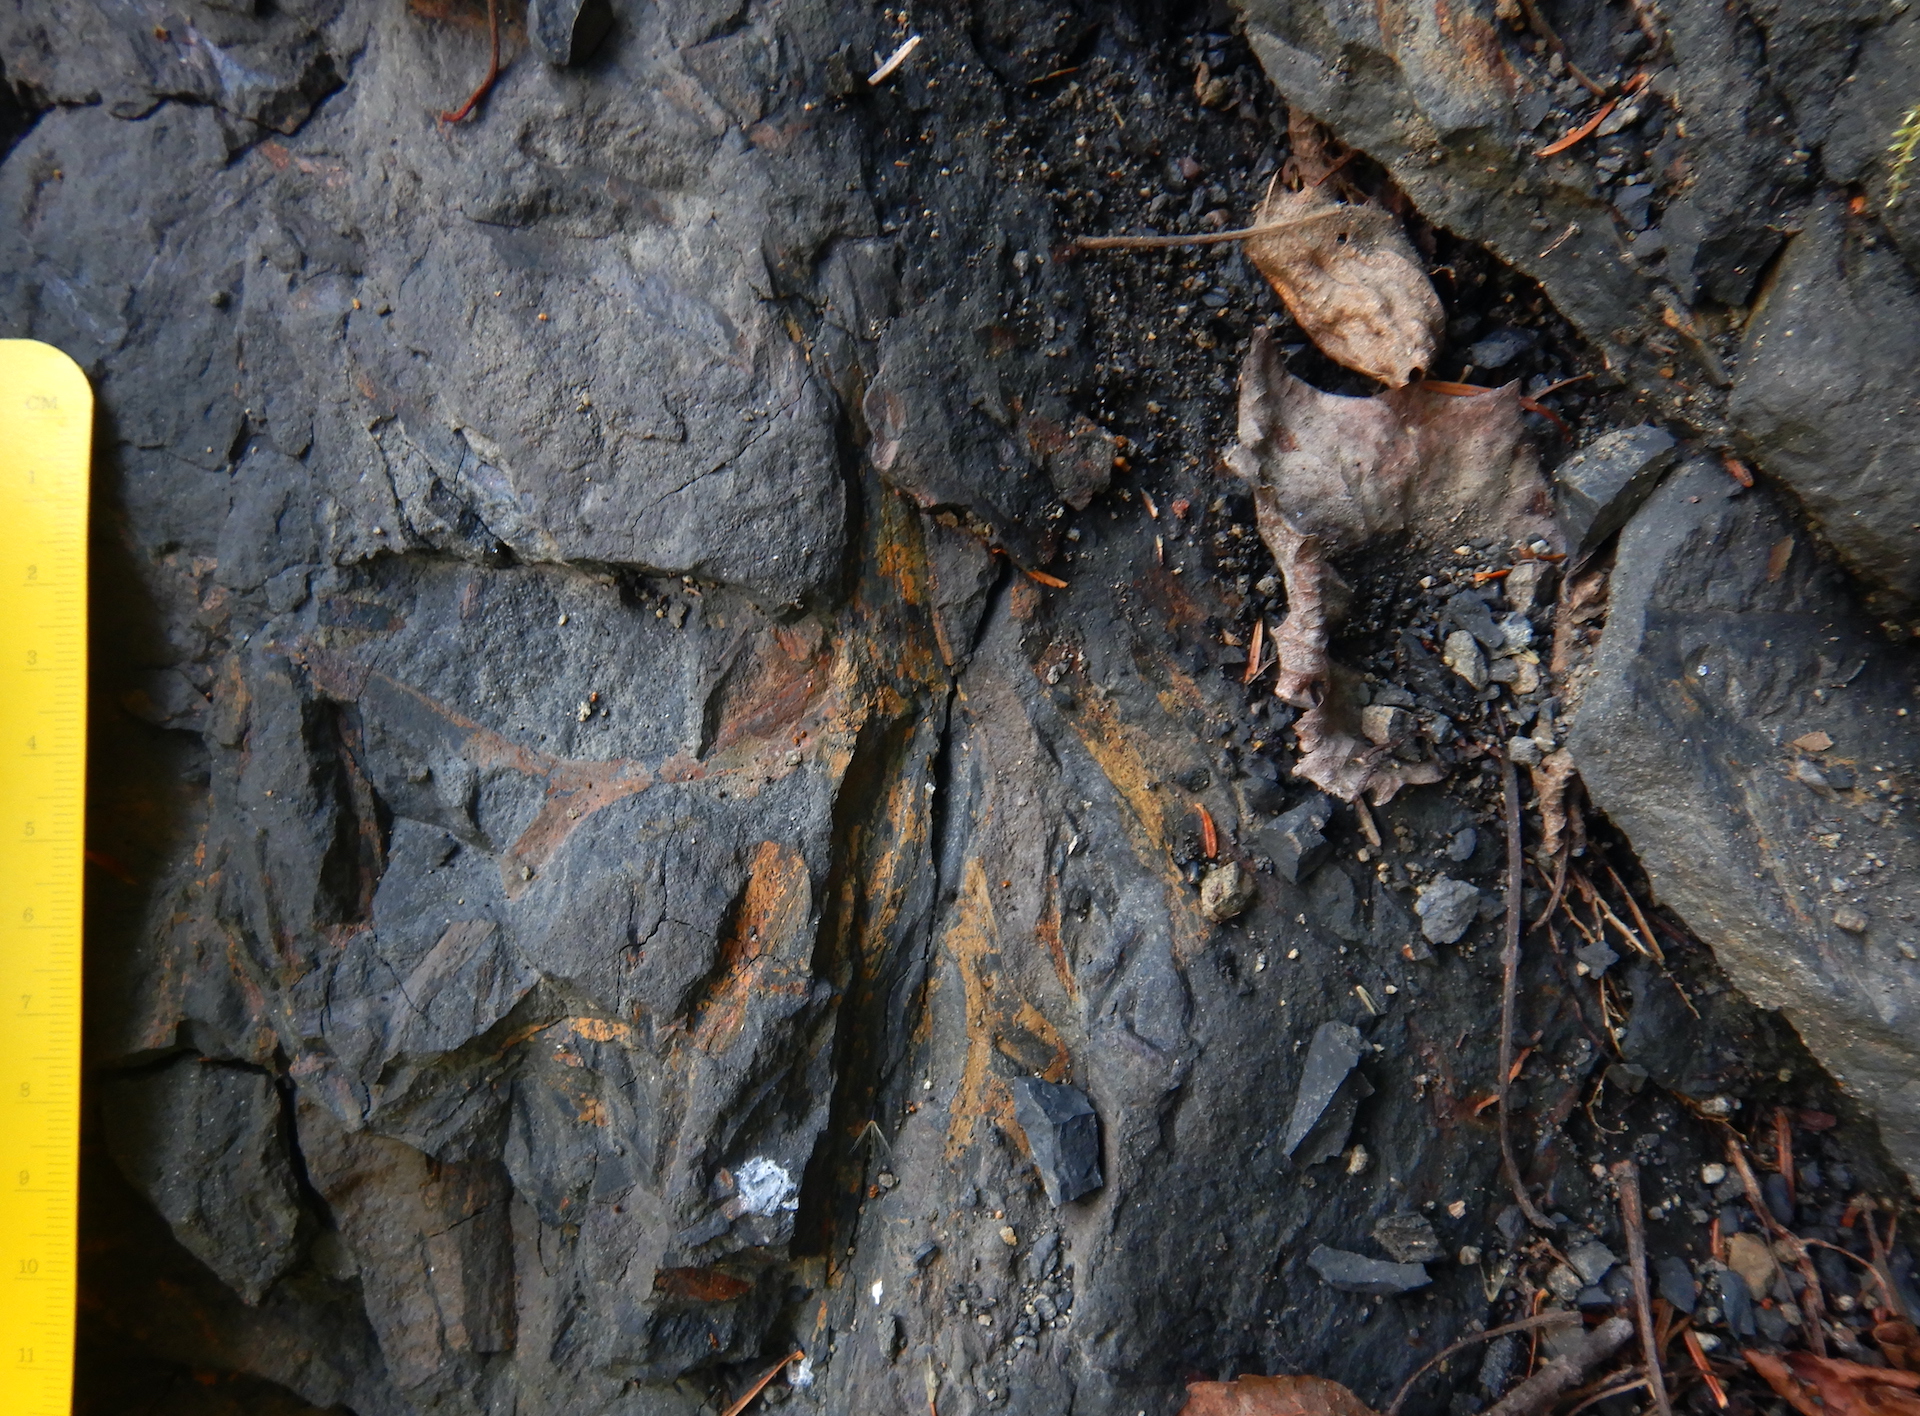 An in situ rock with a plant fossil. The rock is dark gray. The fossil is branched and rusty in color. The scale at left measures about 10 centimeters.